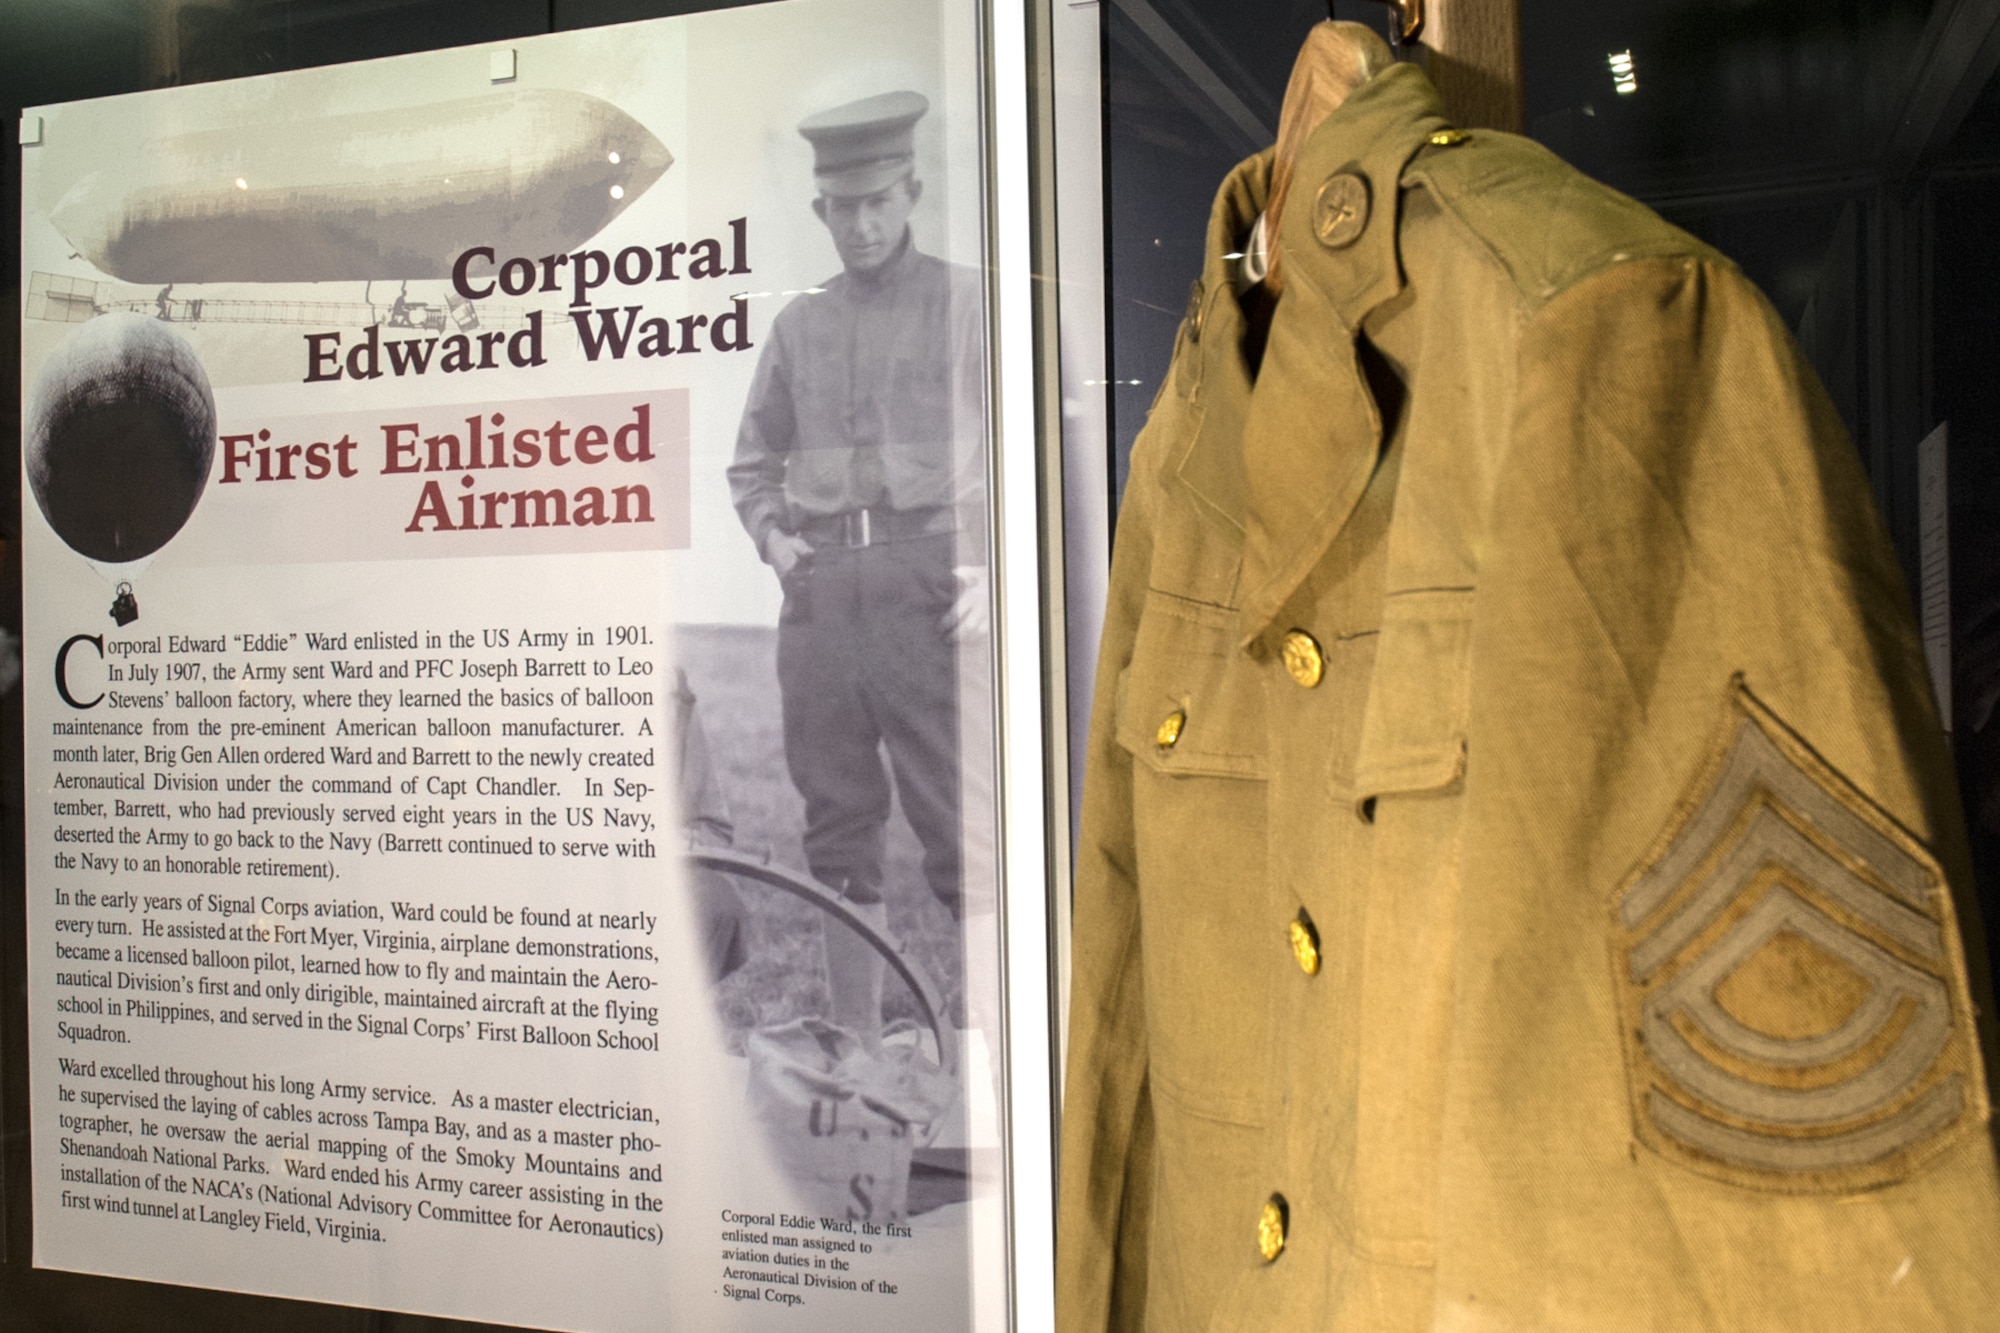 This blouse, on display in the Early Years Gallery, was worn by Edward Ward during his military career. Cpl. Ward was the first enlisted man to be assigned aviation duties in the Aeronautical Division of the Signal Corps. The items were donated by the Ward Family. (U.S. Air Force photo) 